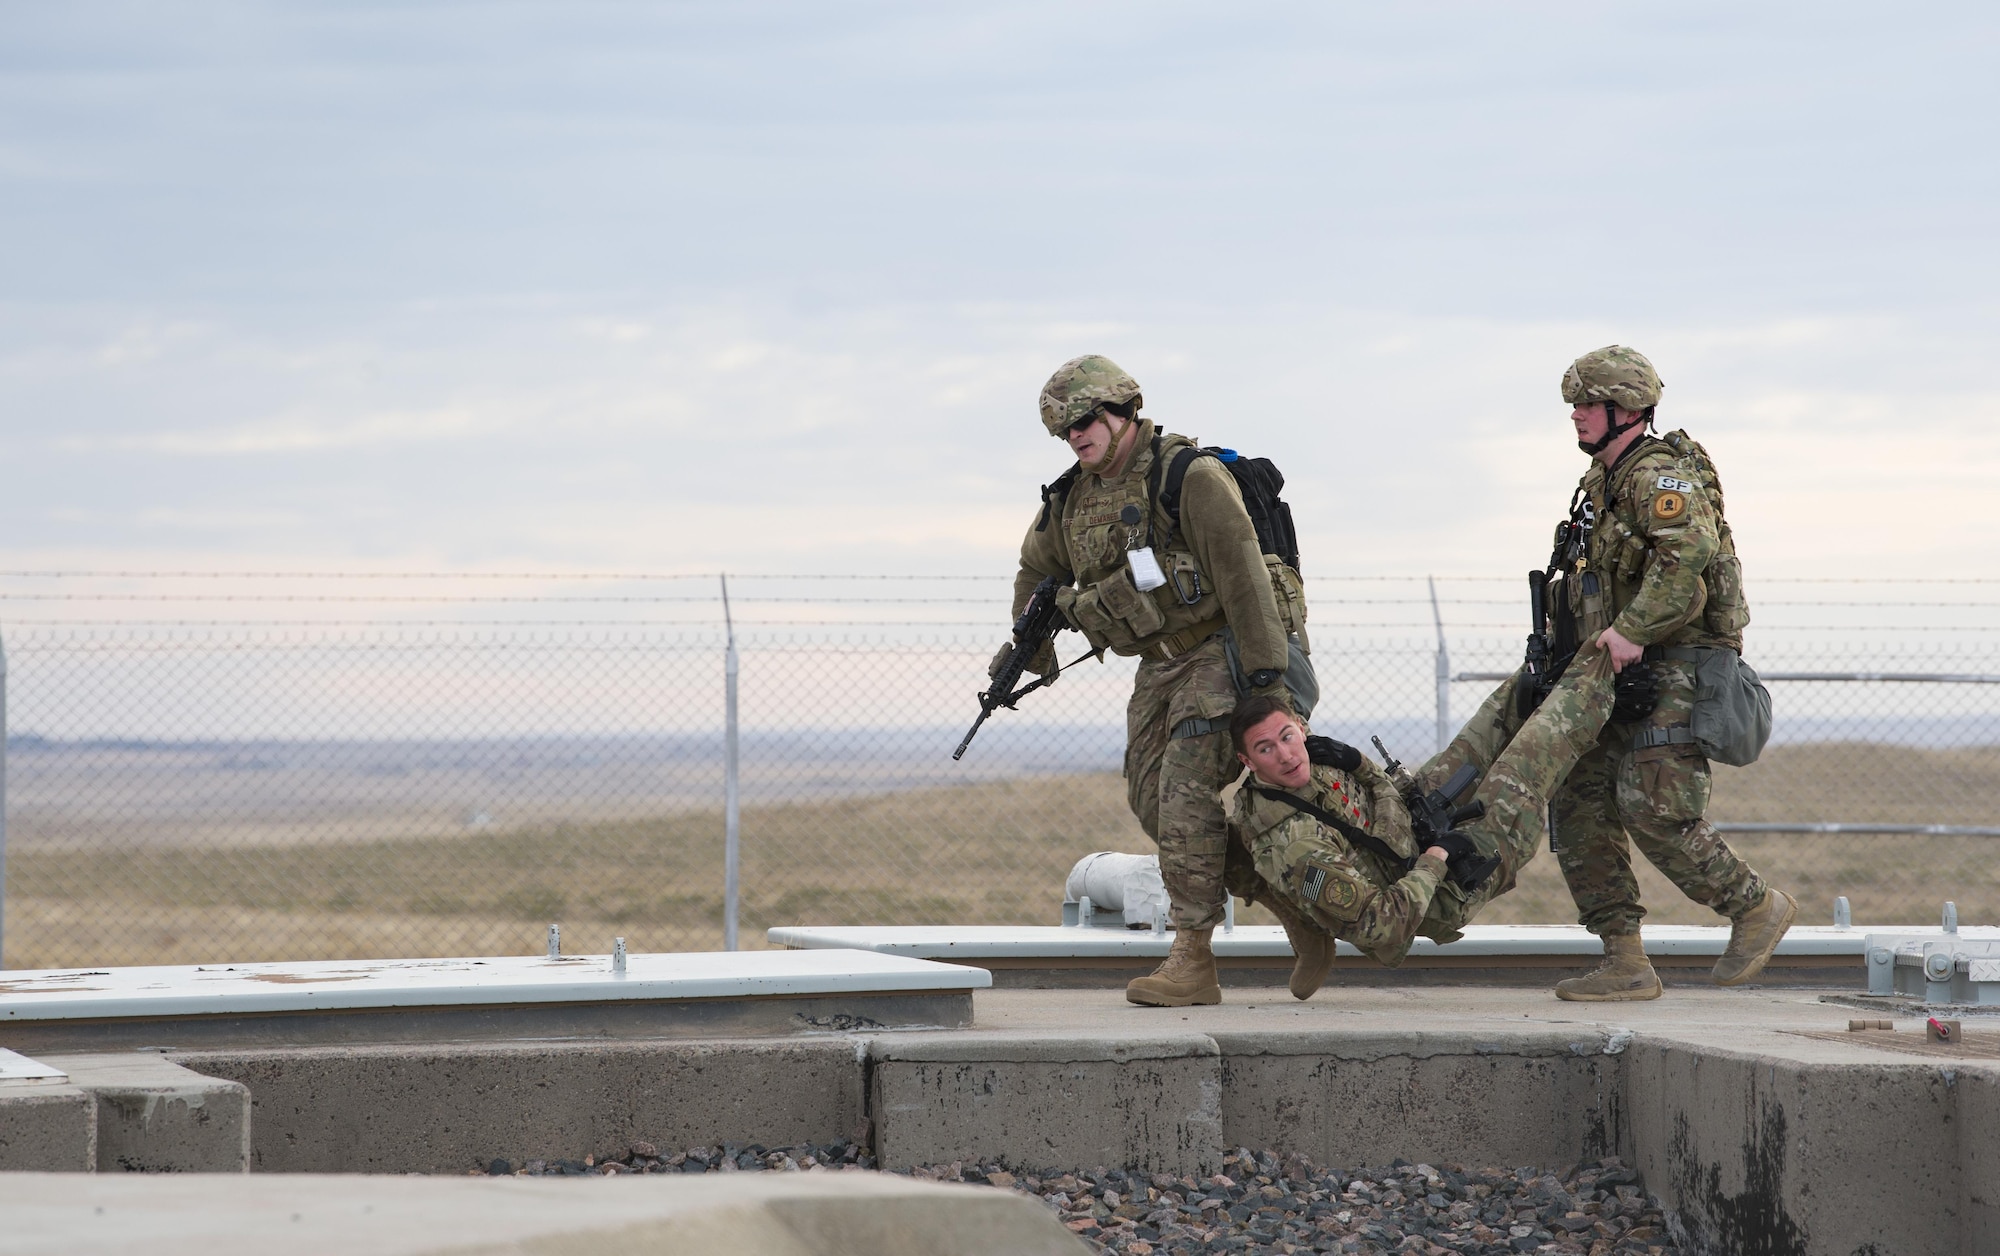 Two airman carry an airman across the ground